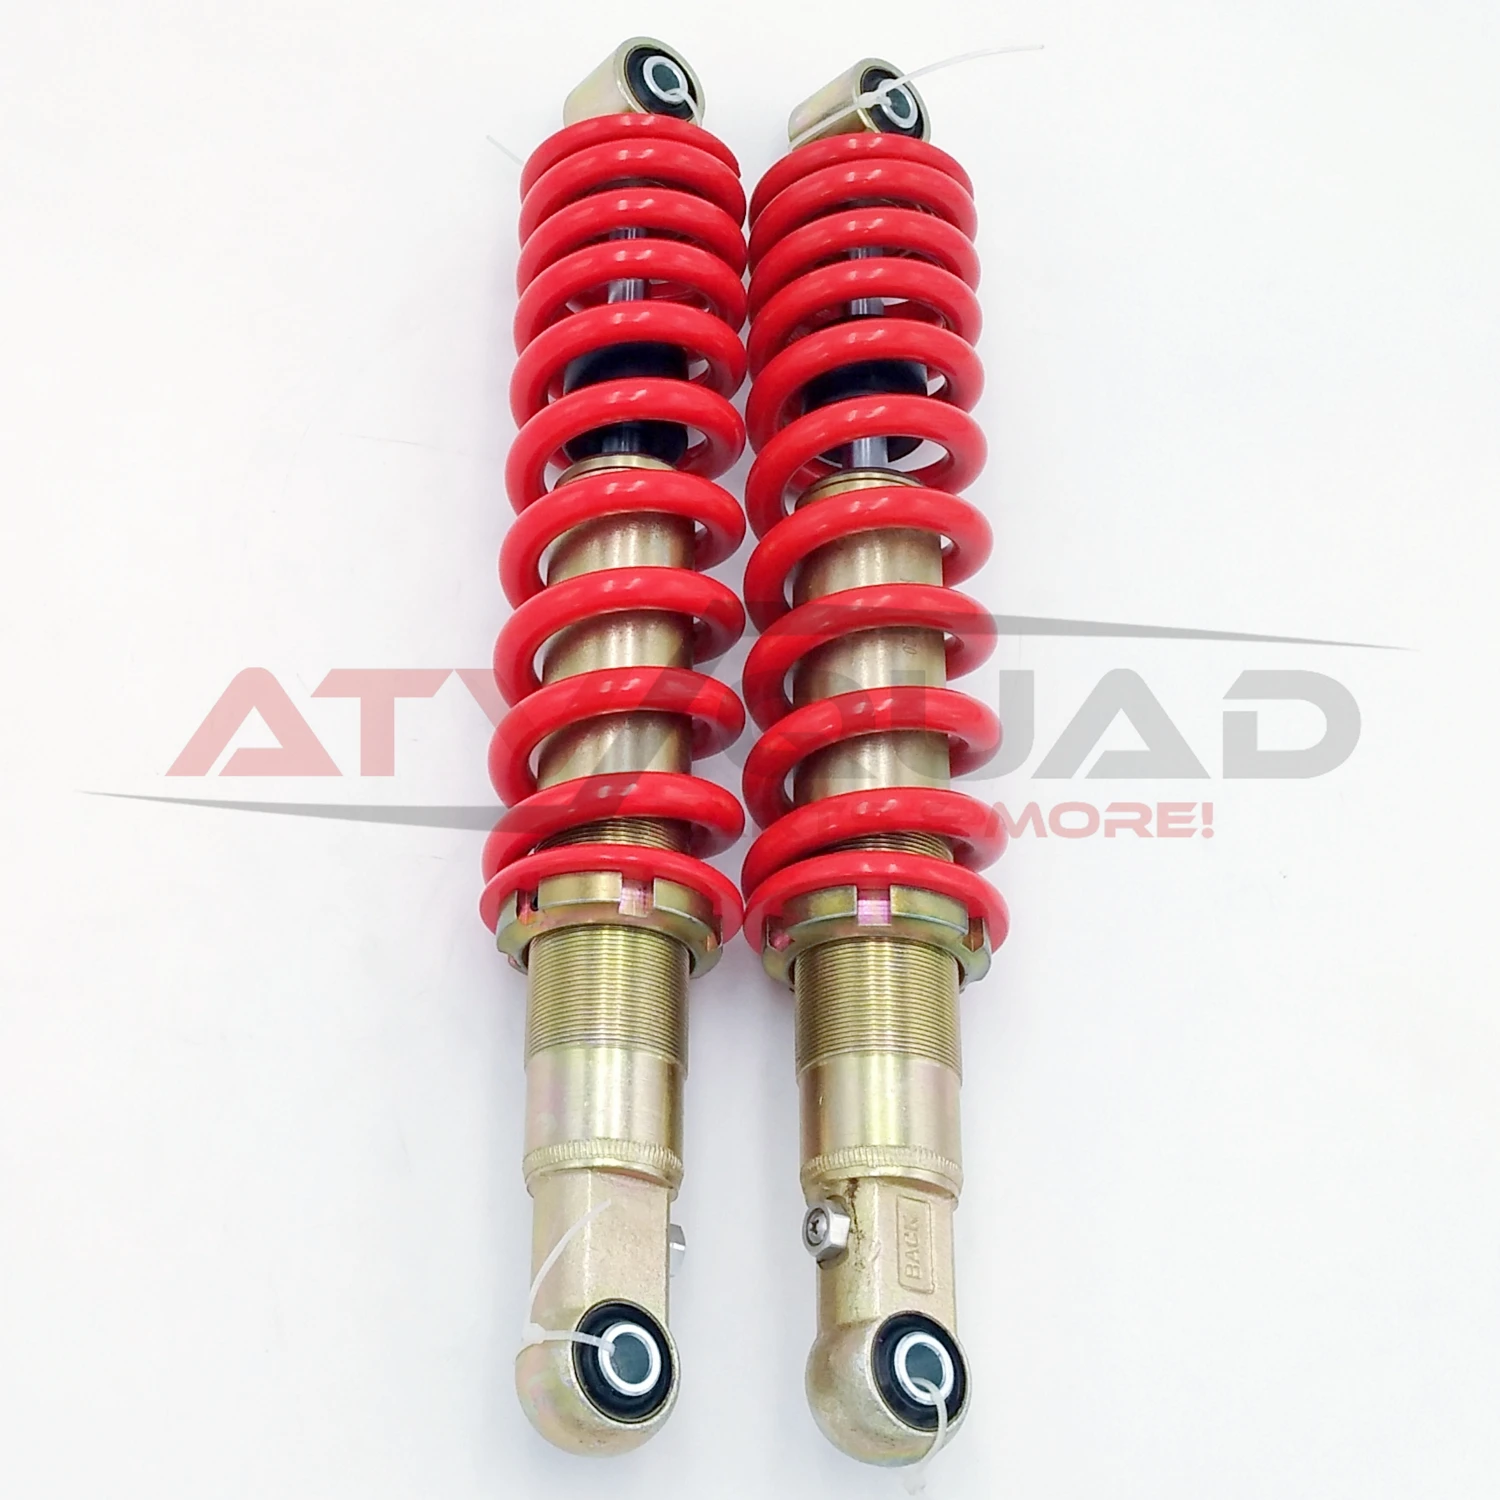 Red Shock Absorber for CFMoto 400 450 500 X5 500S 520 600 X6 625 600 Touring Goes 520 525 625i 9010-050600-1000 9010-060600-1000